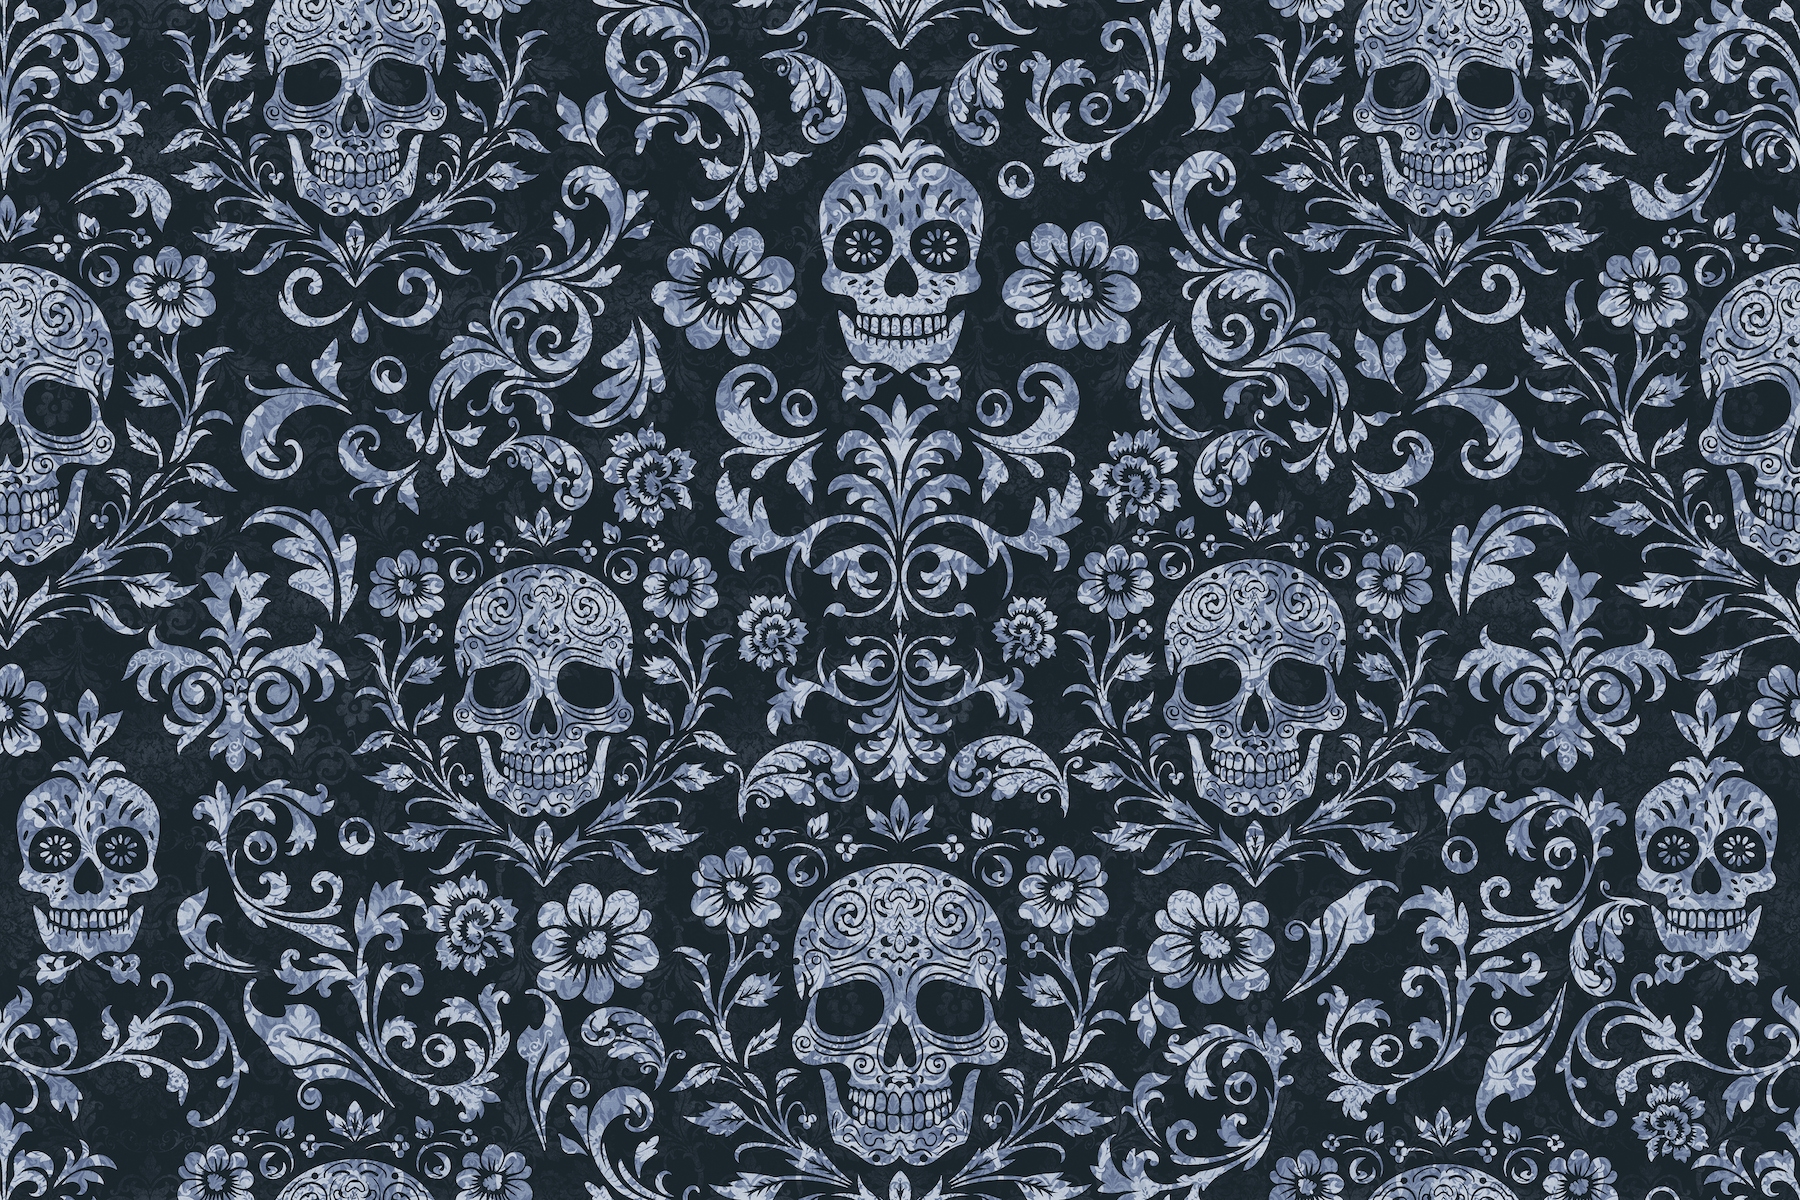 Bless international Ambesonne Sugar Skull Fabric By The Yard Flower  Pattern With Skulls On Geometric Floral Damask Background Microfiber  Fabric For Arts And Crafts Textiles  Decor 3 Yards Purple White Baby